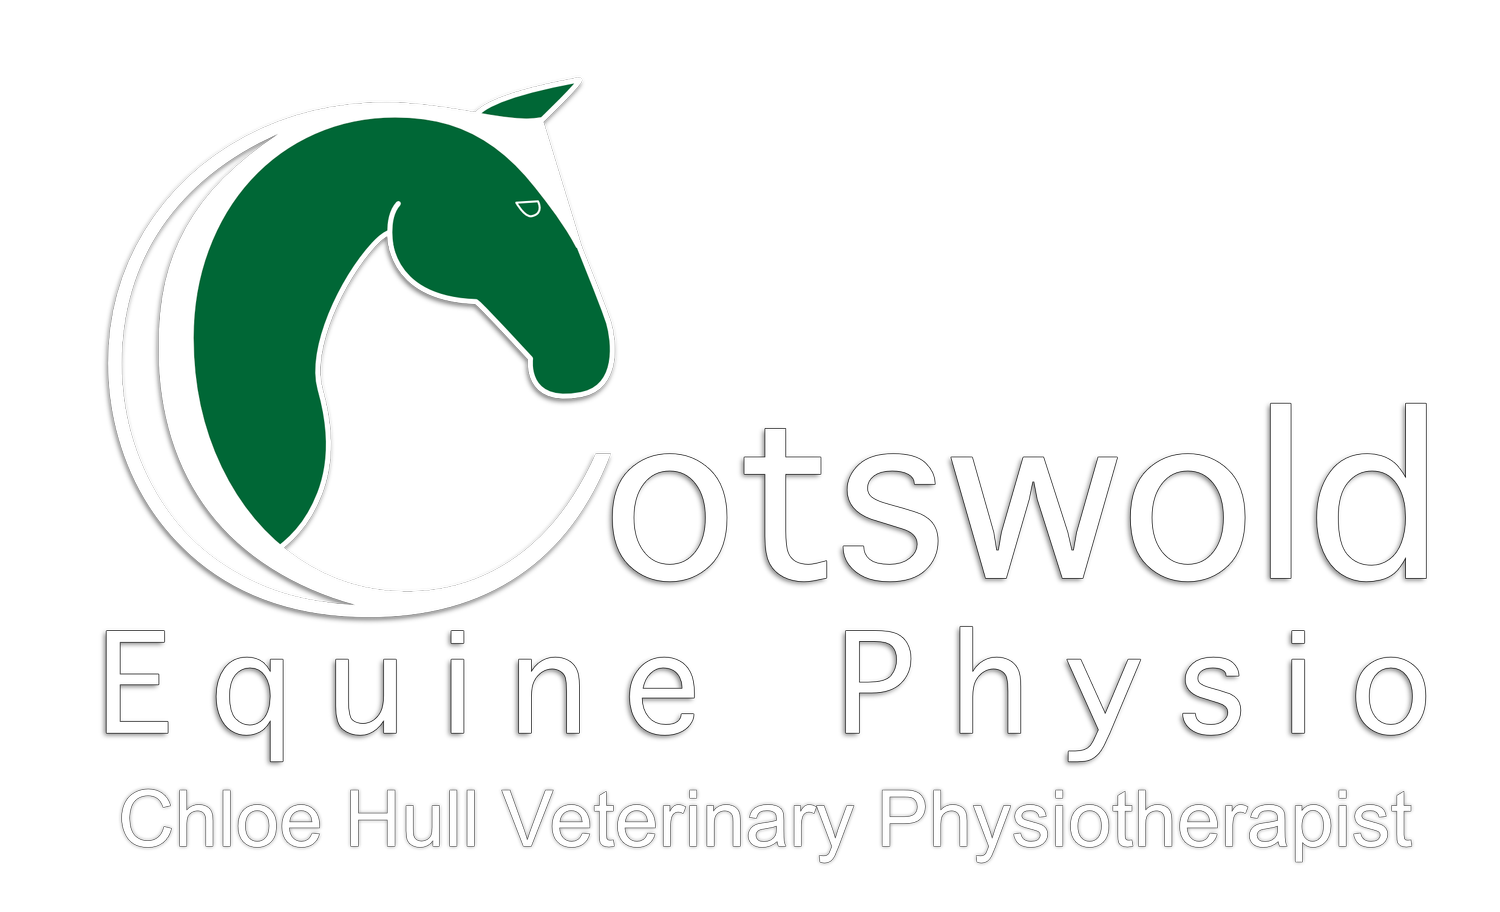 Cotswold Equine Physio